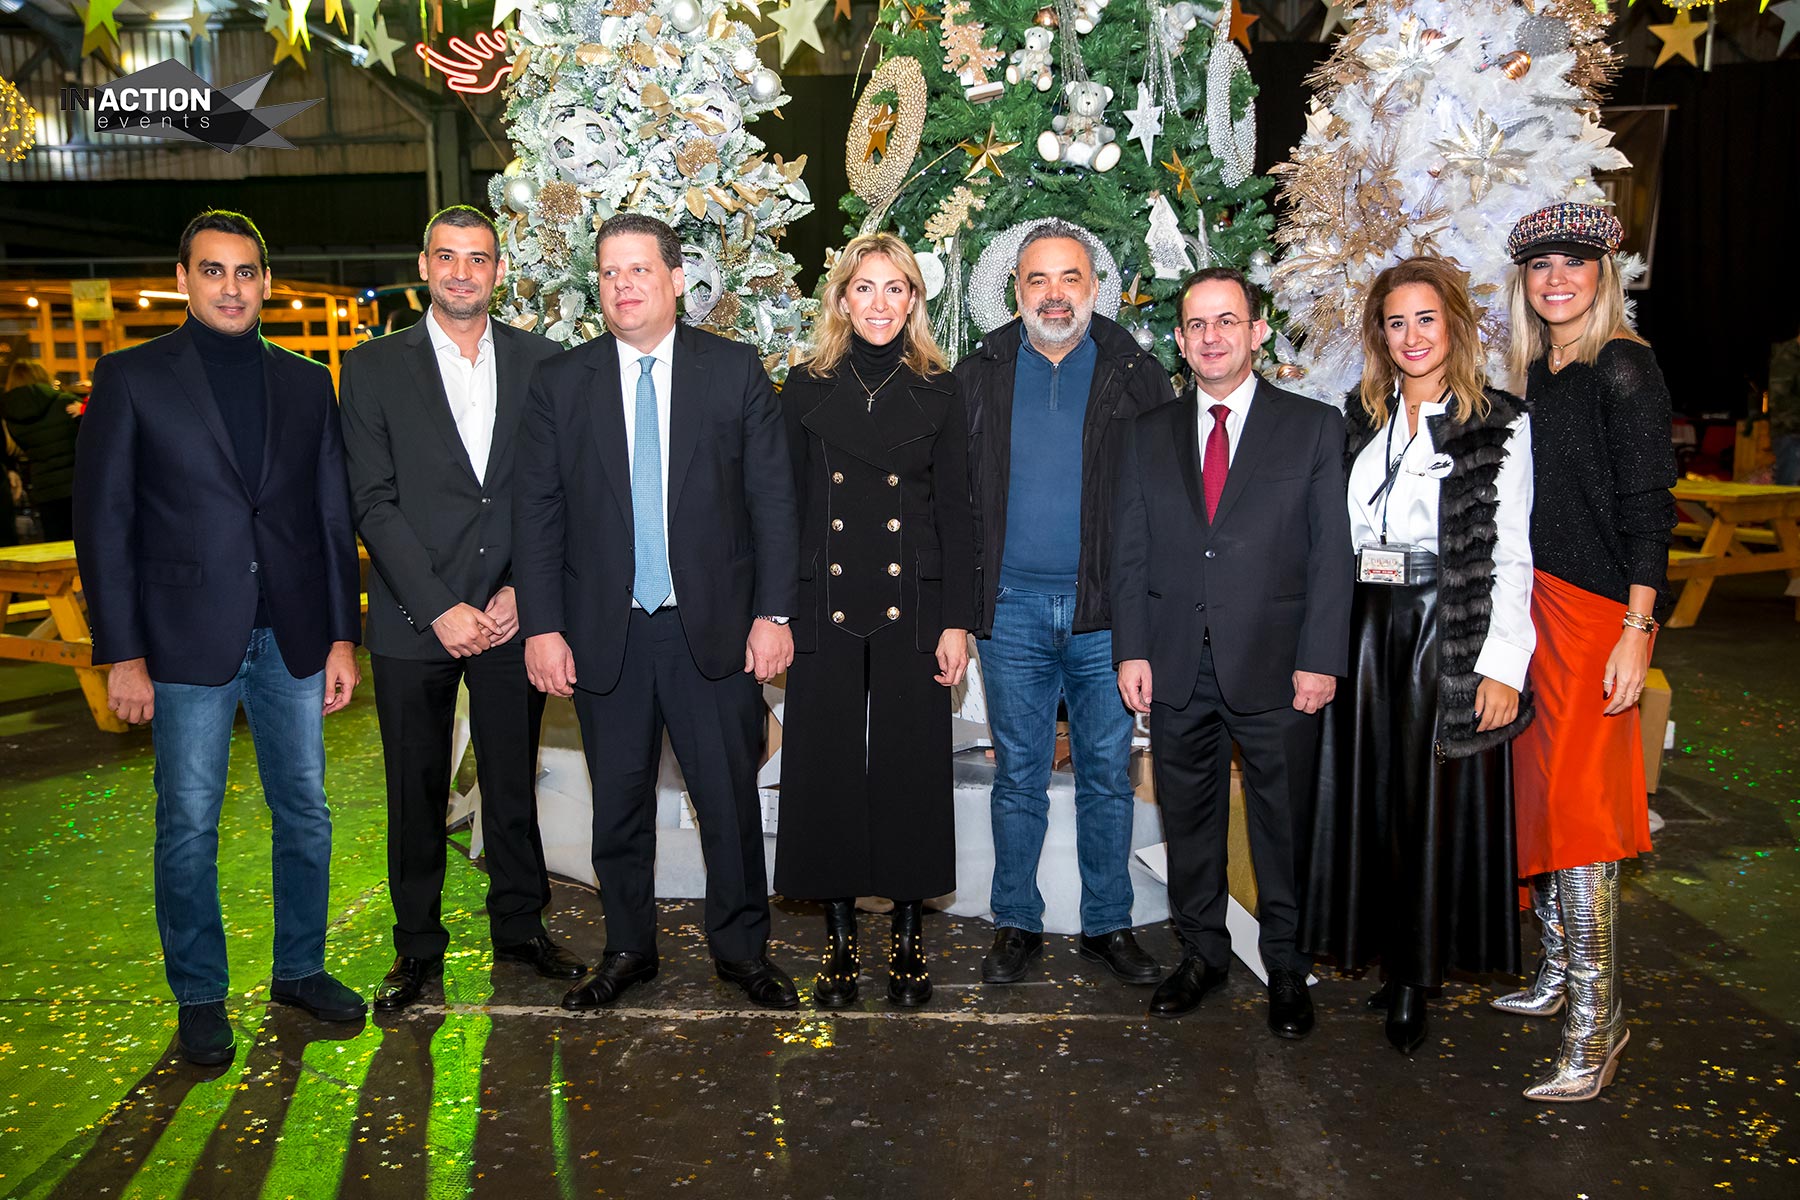    "Christmas in Action 2018": The largest Christmas market in Lebanon   